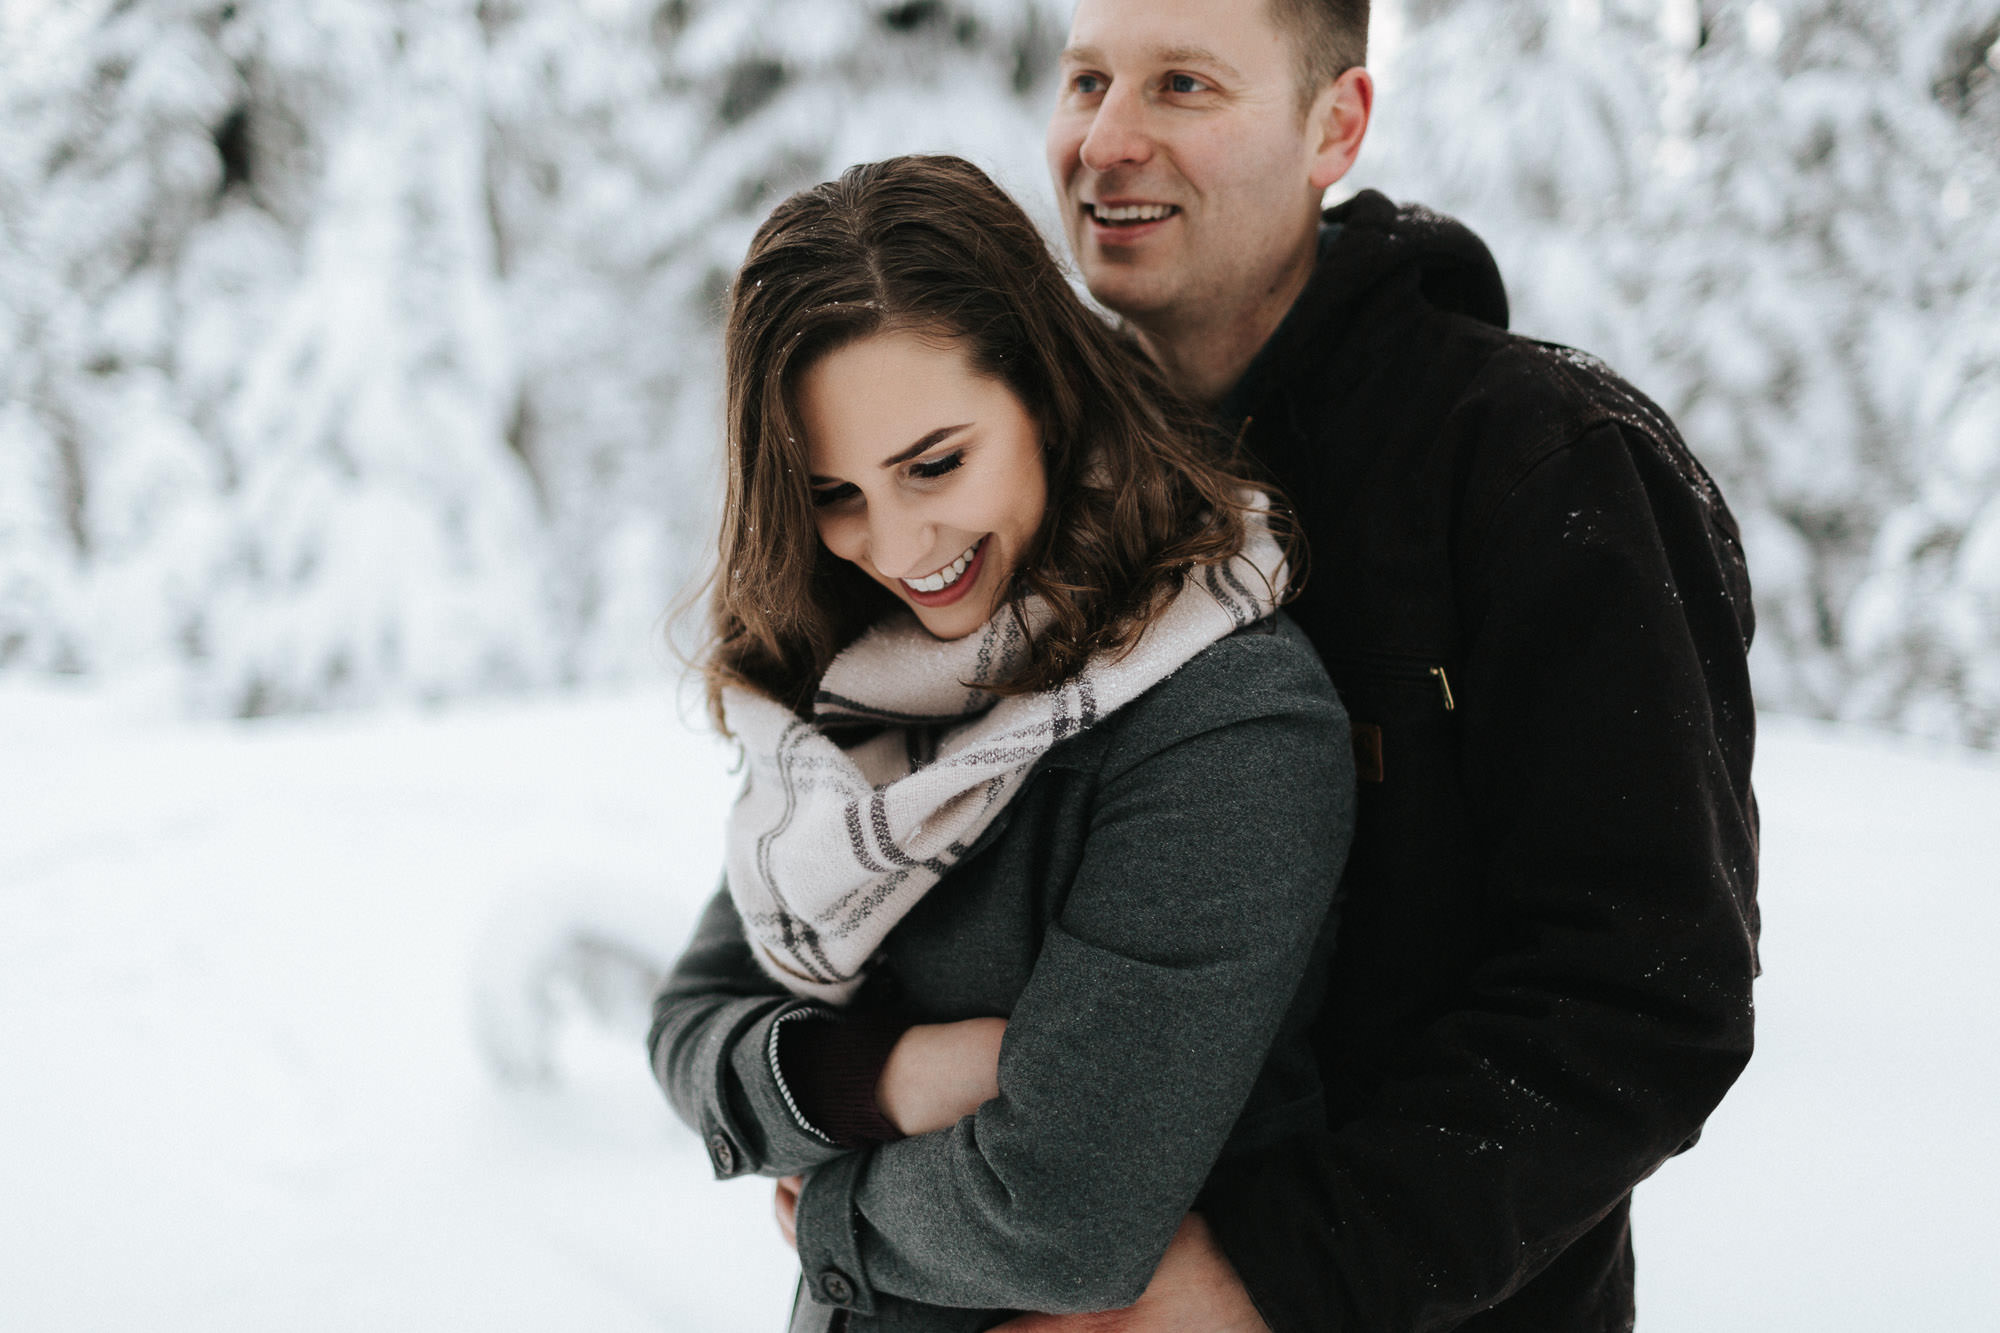 Couple embrace in snowy forest in Bend, Oregon